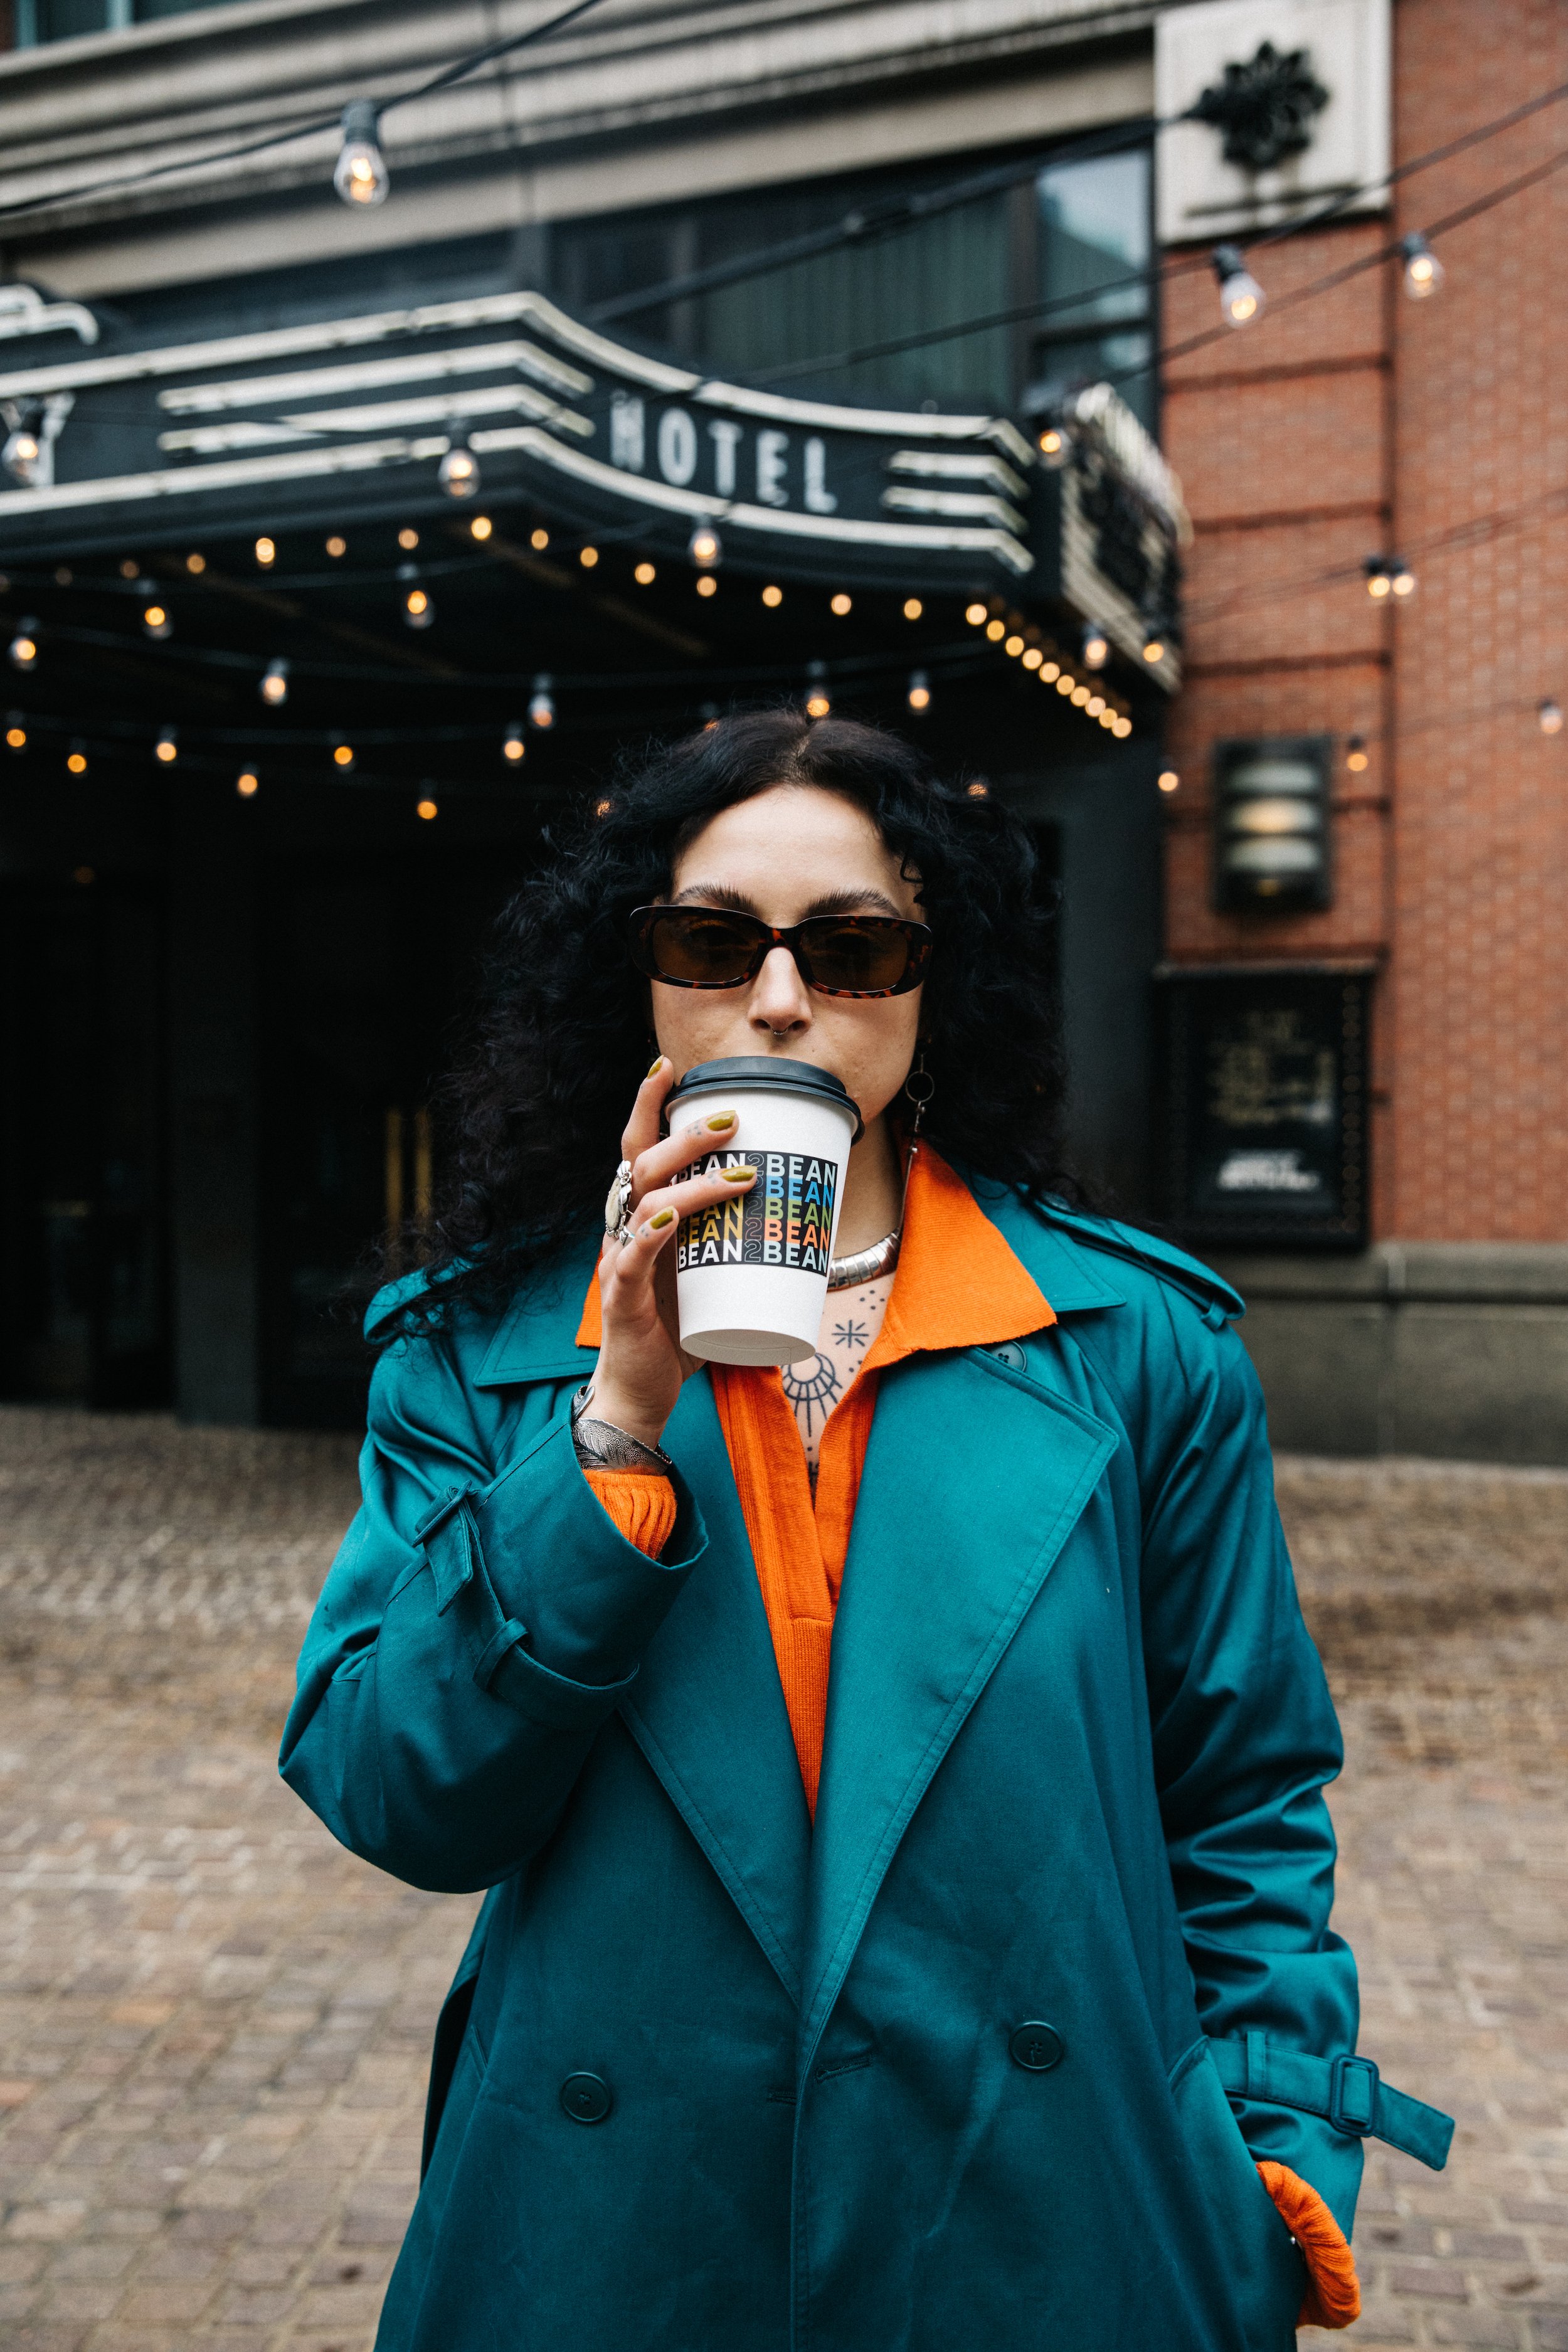 Drinking Bean2Bean Coffee Outside the Roxy Hotel in NYC, Photo by Corey Jermaine